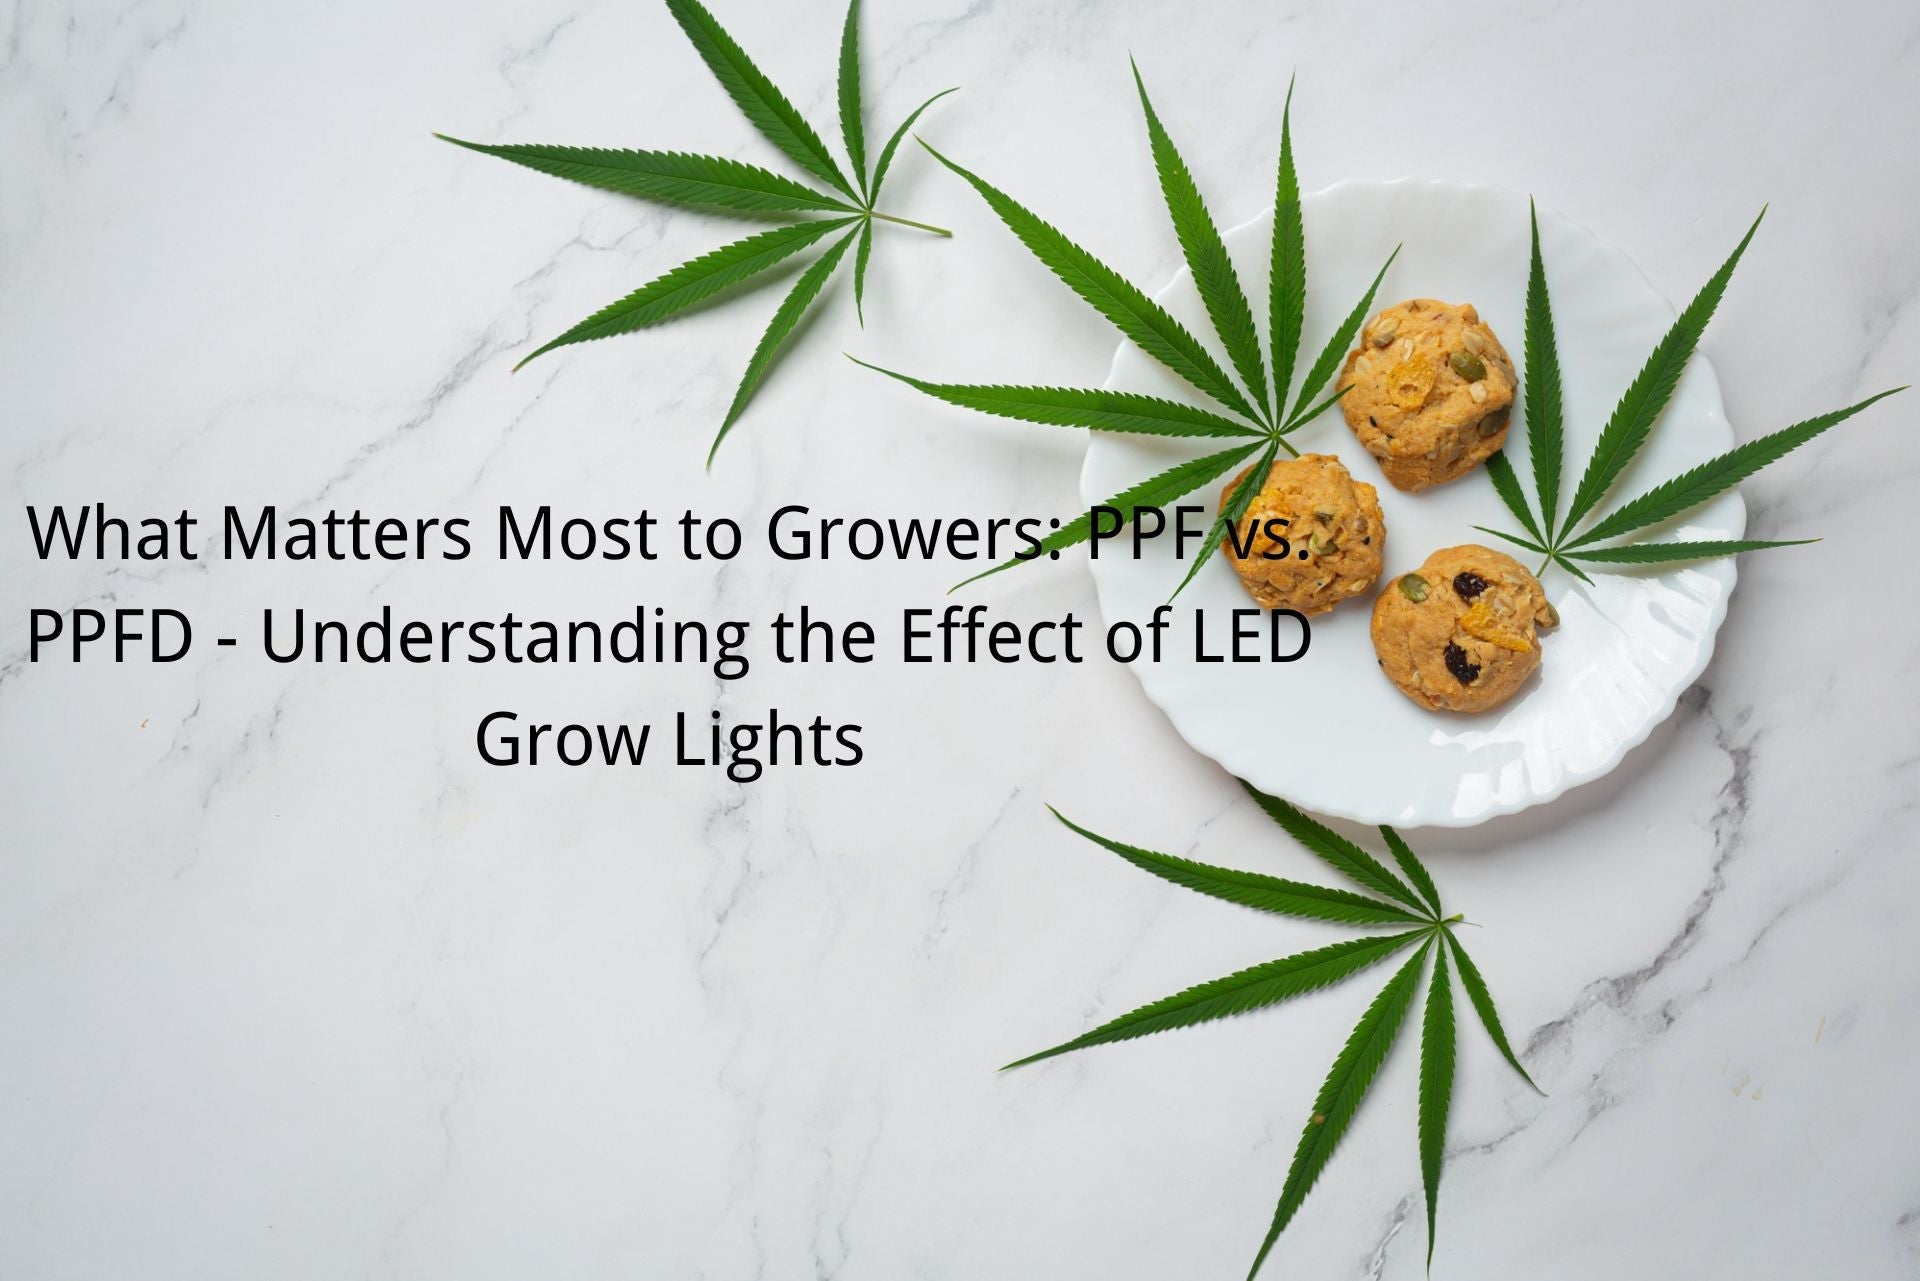 What Matters Most to Growers: PPF vs. PPFD - Understanding the Effect of LED Grow Lights